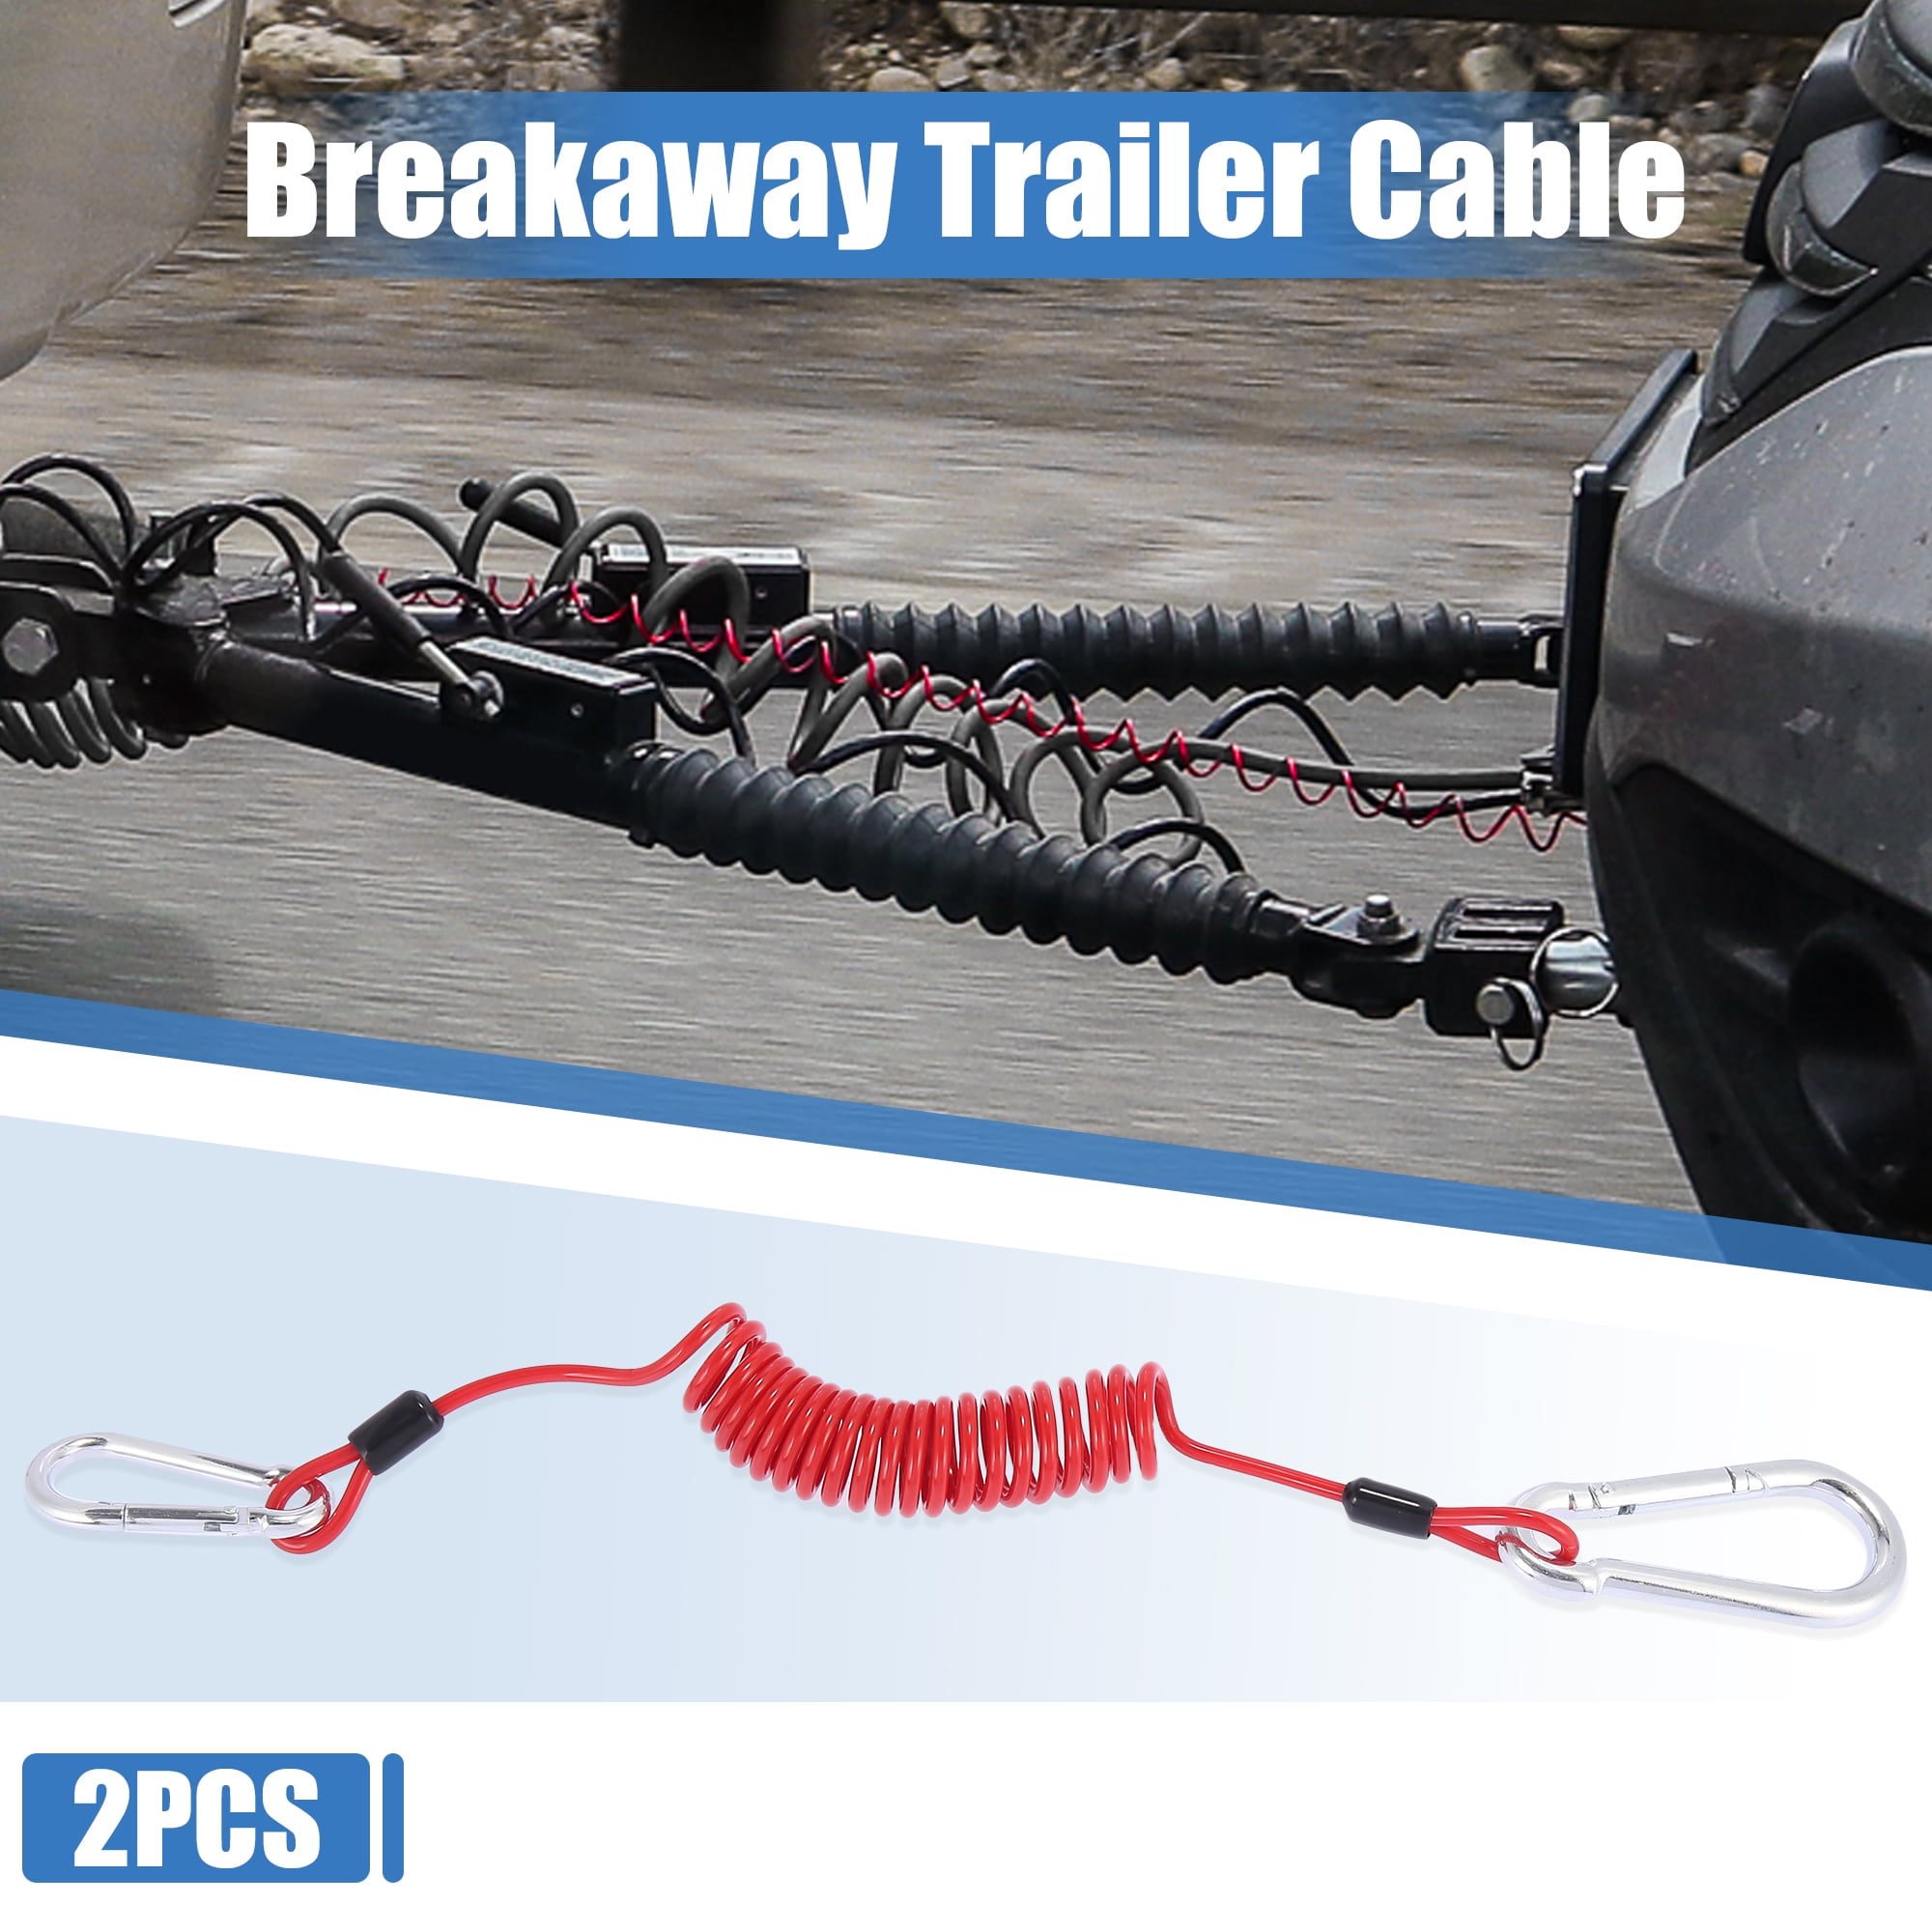 Malloryx 2pcs 6 Breakaway Trailer Cable with Pin Trailer Brake Cable RV Stainless Steel Spring Towing Coiled Wire Safety Straps Ground Clip,for Breakaway Switch 